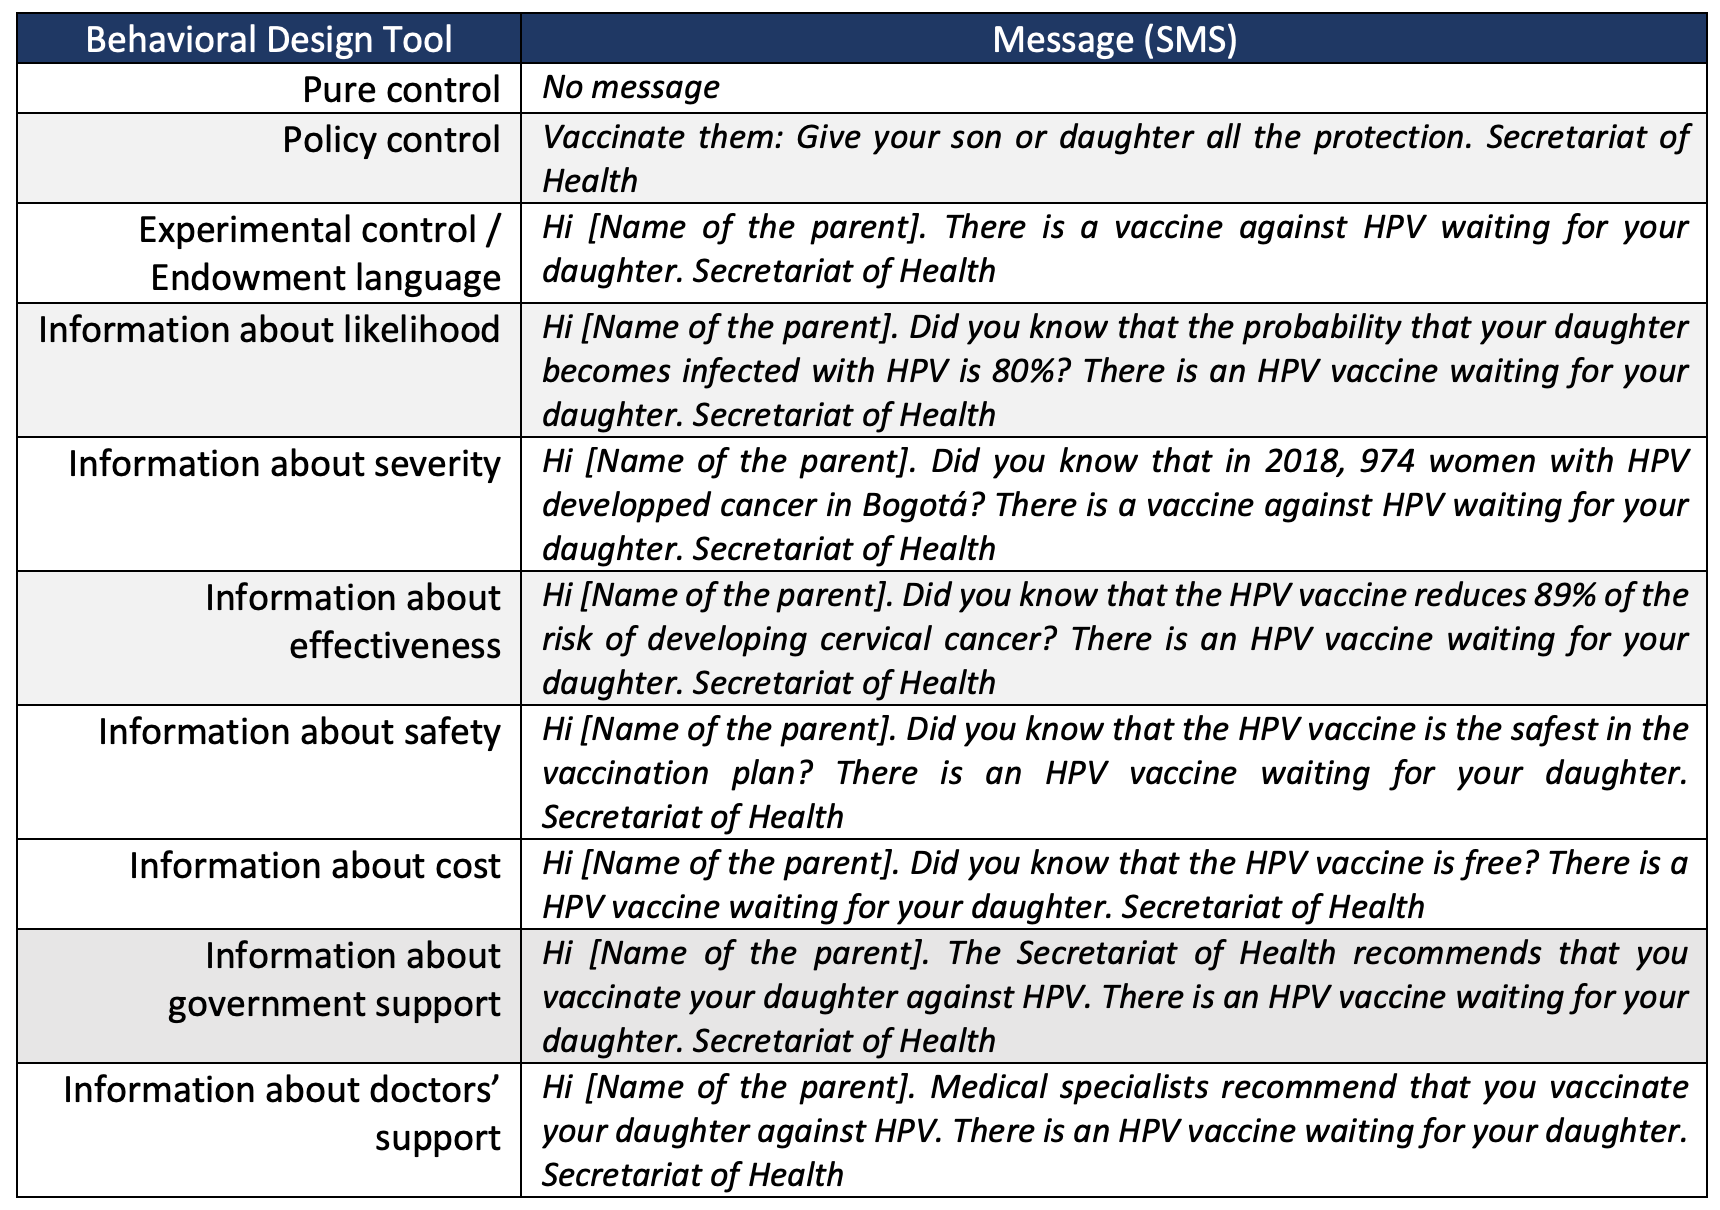 Table 1. Message content by behavioral design tool